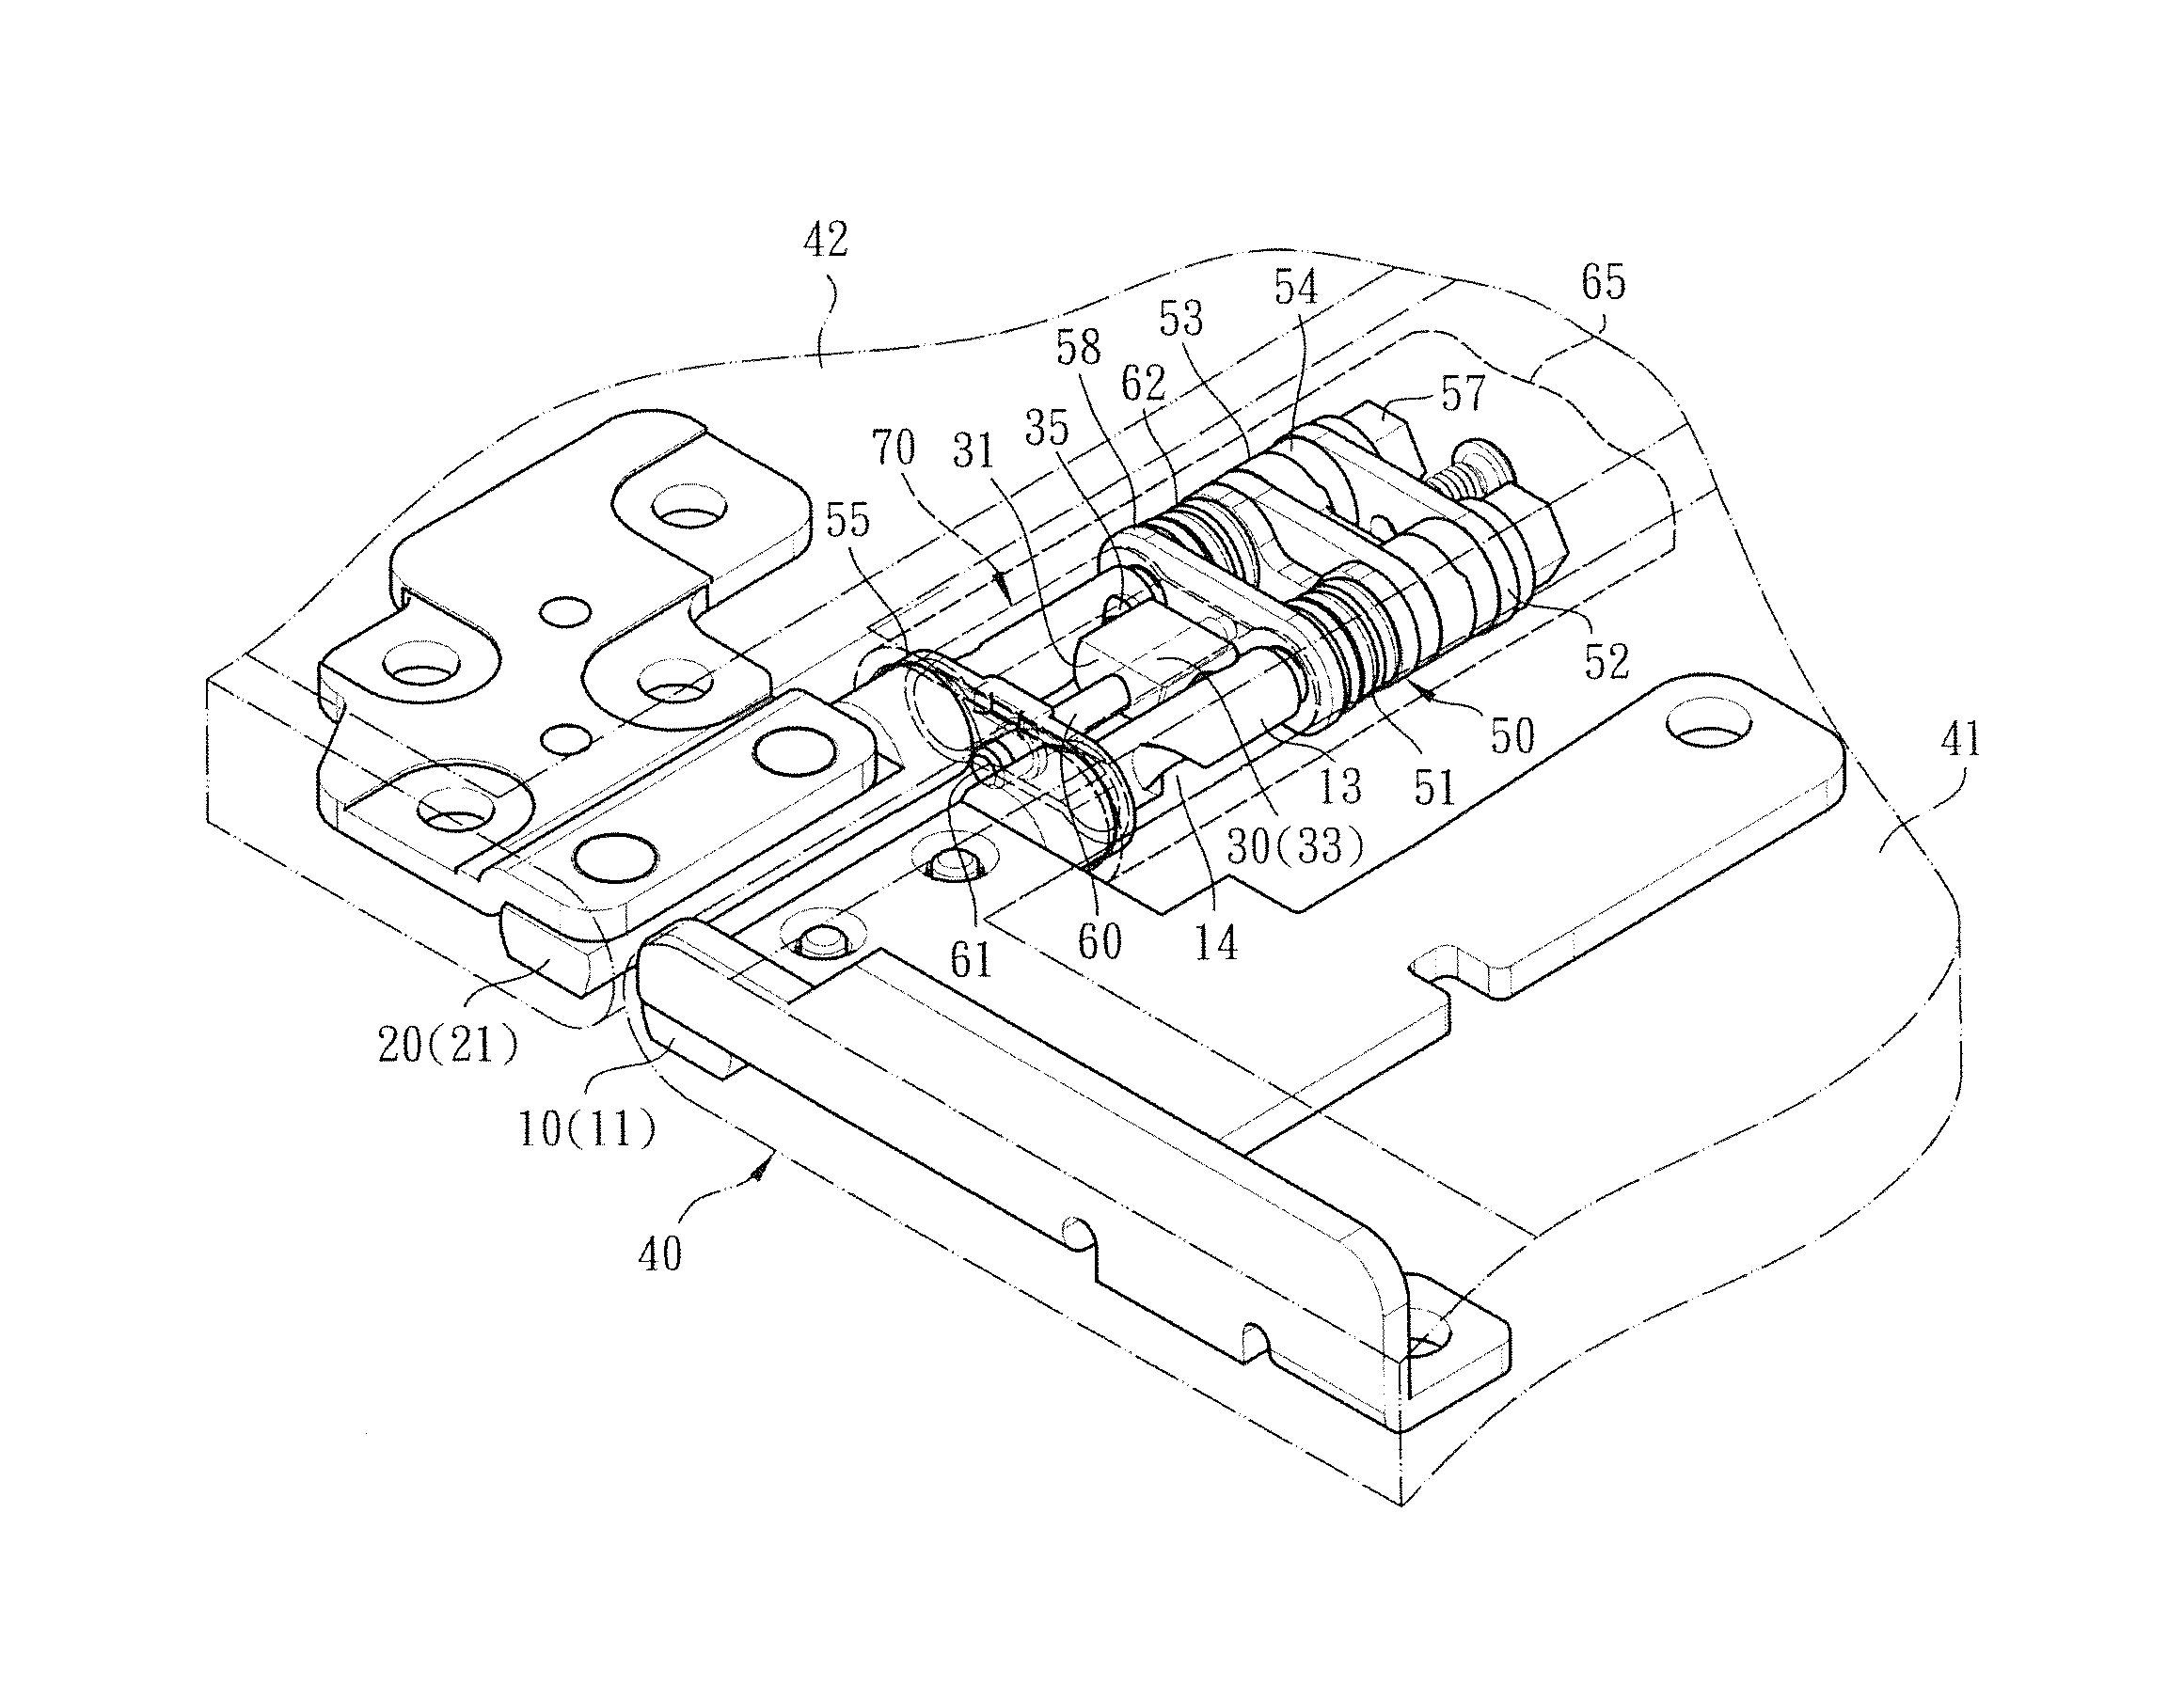 Transmission stabilization device applied to dual-shaft system